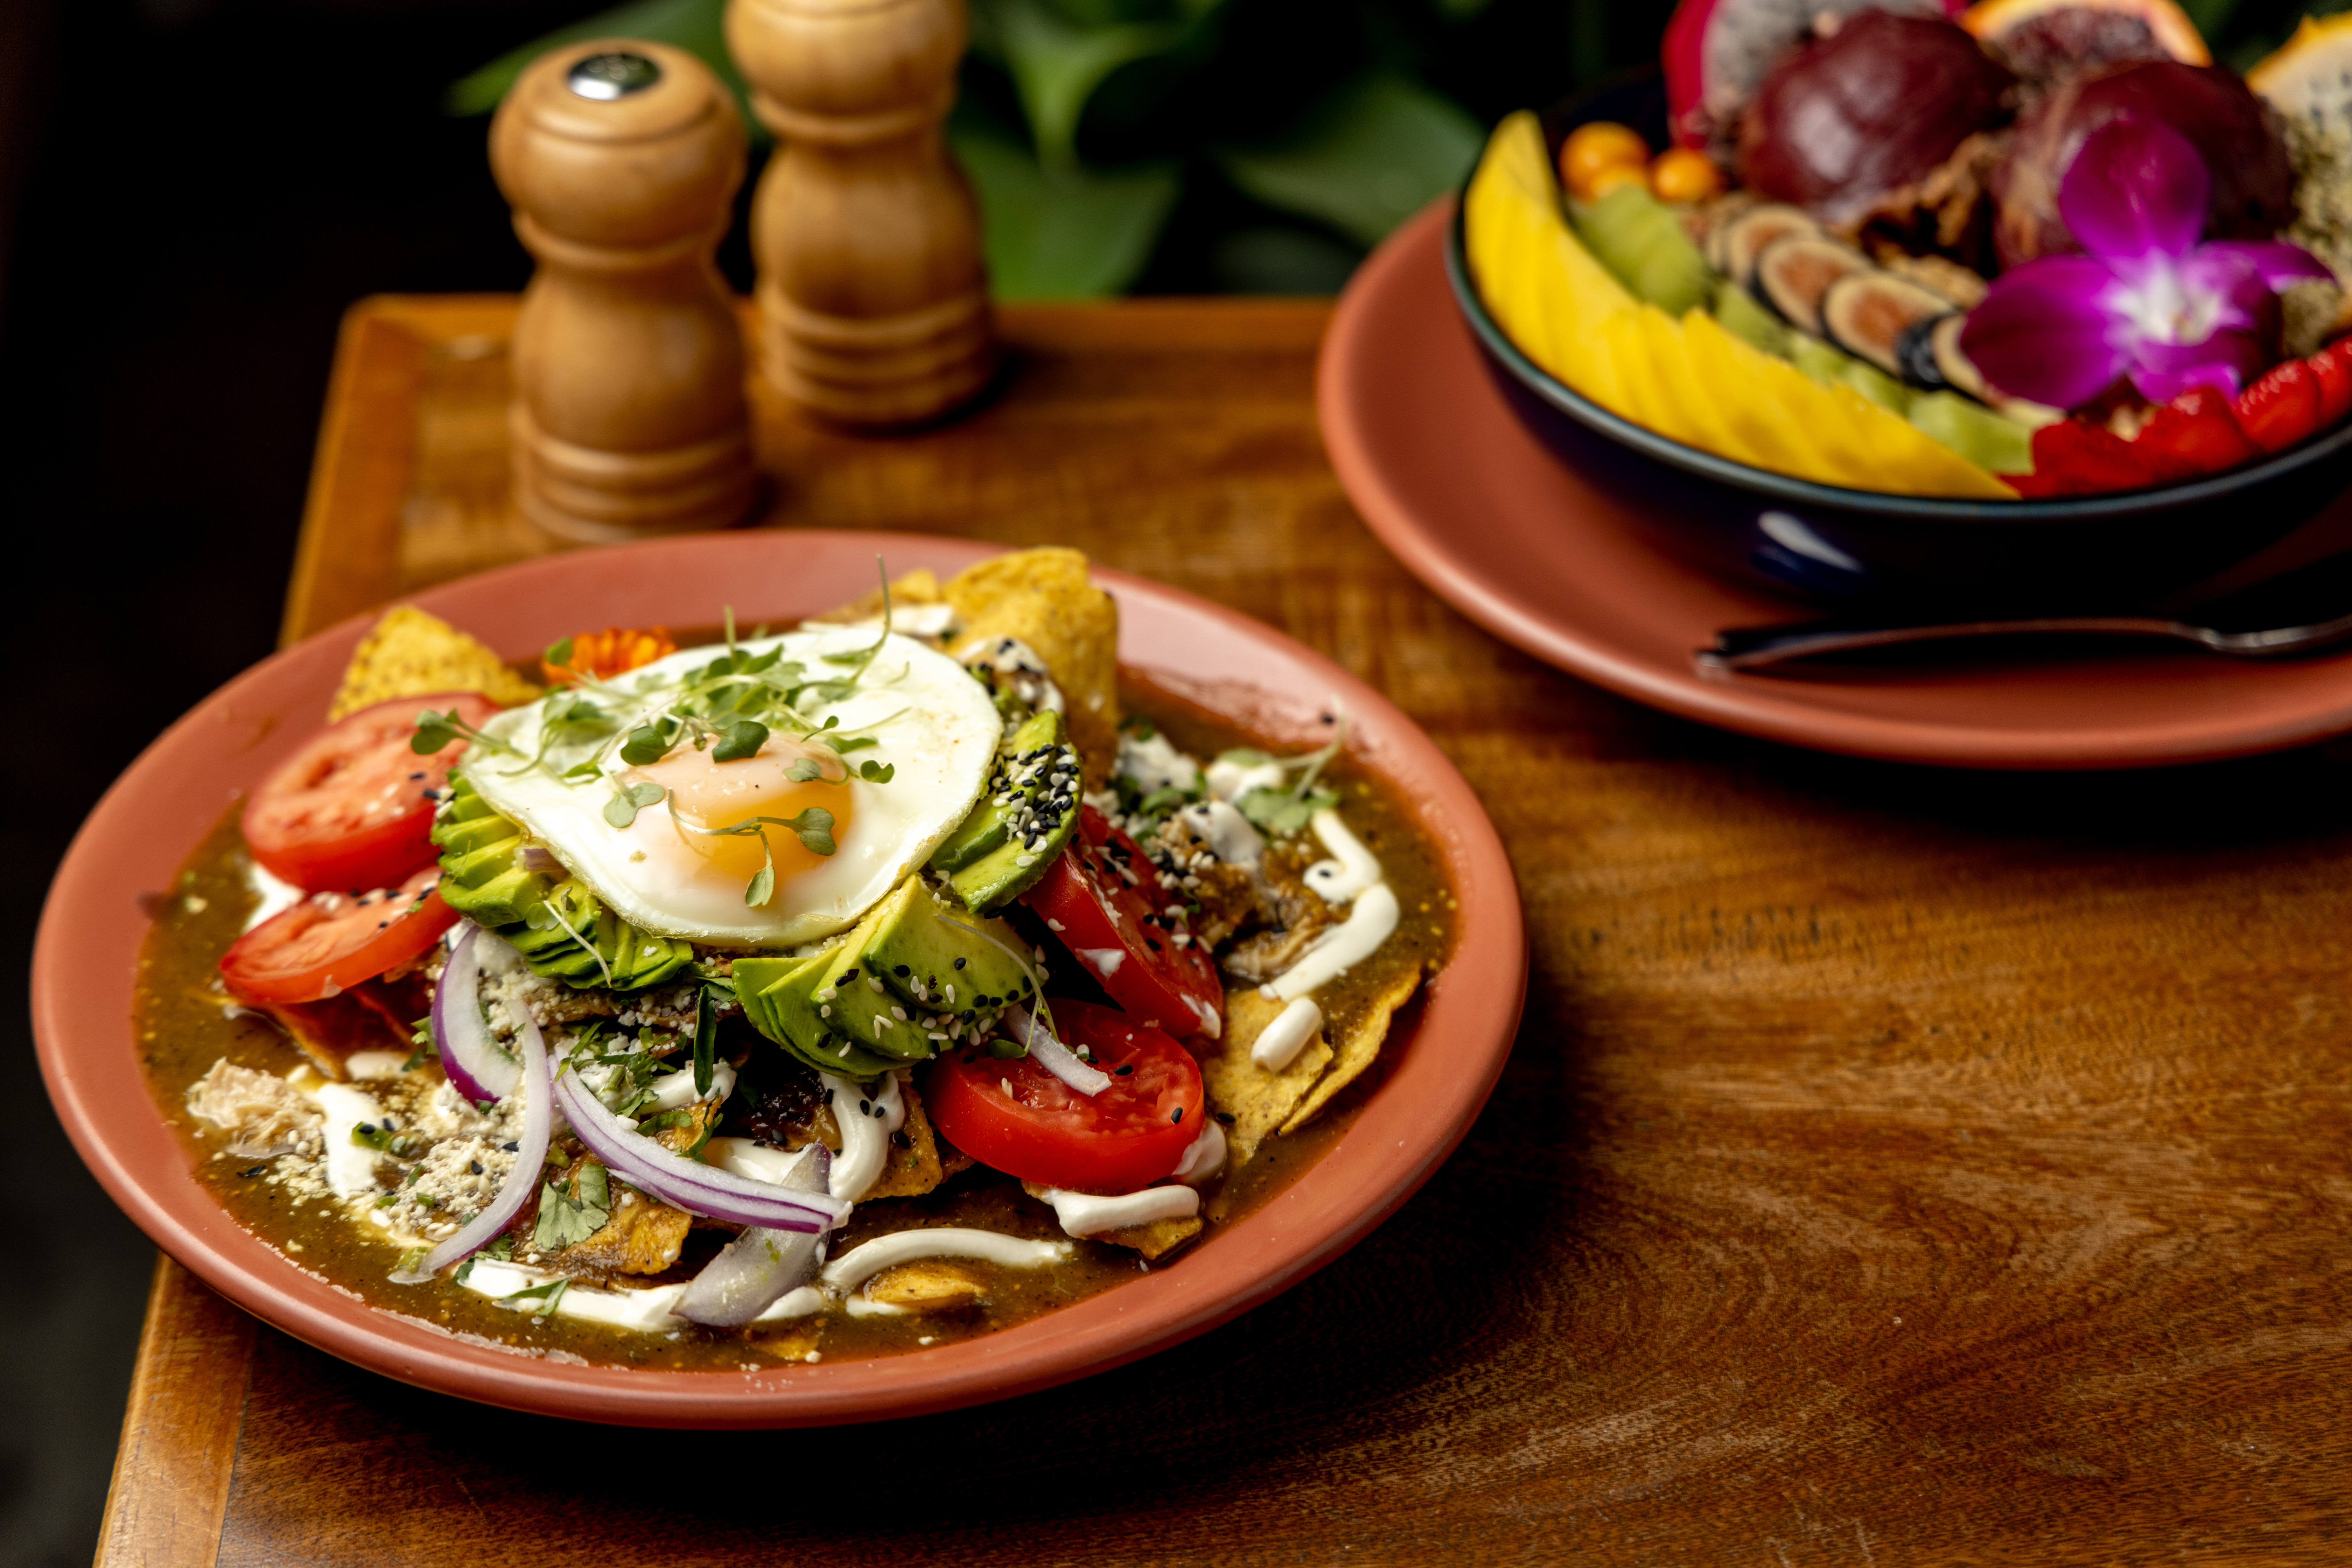 Ojo de Agua’s chilaquiles, topped with a fried egg, cilantro, onions, and verde salsa, with an acai bowl topped with fresh fruit on the side.